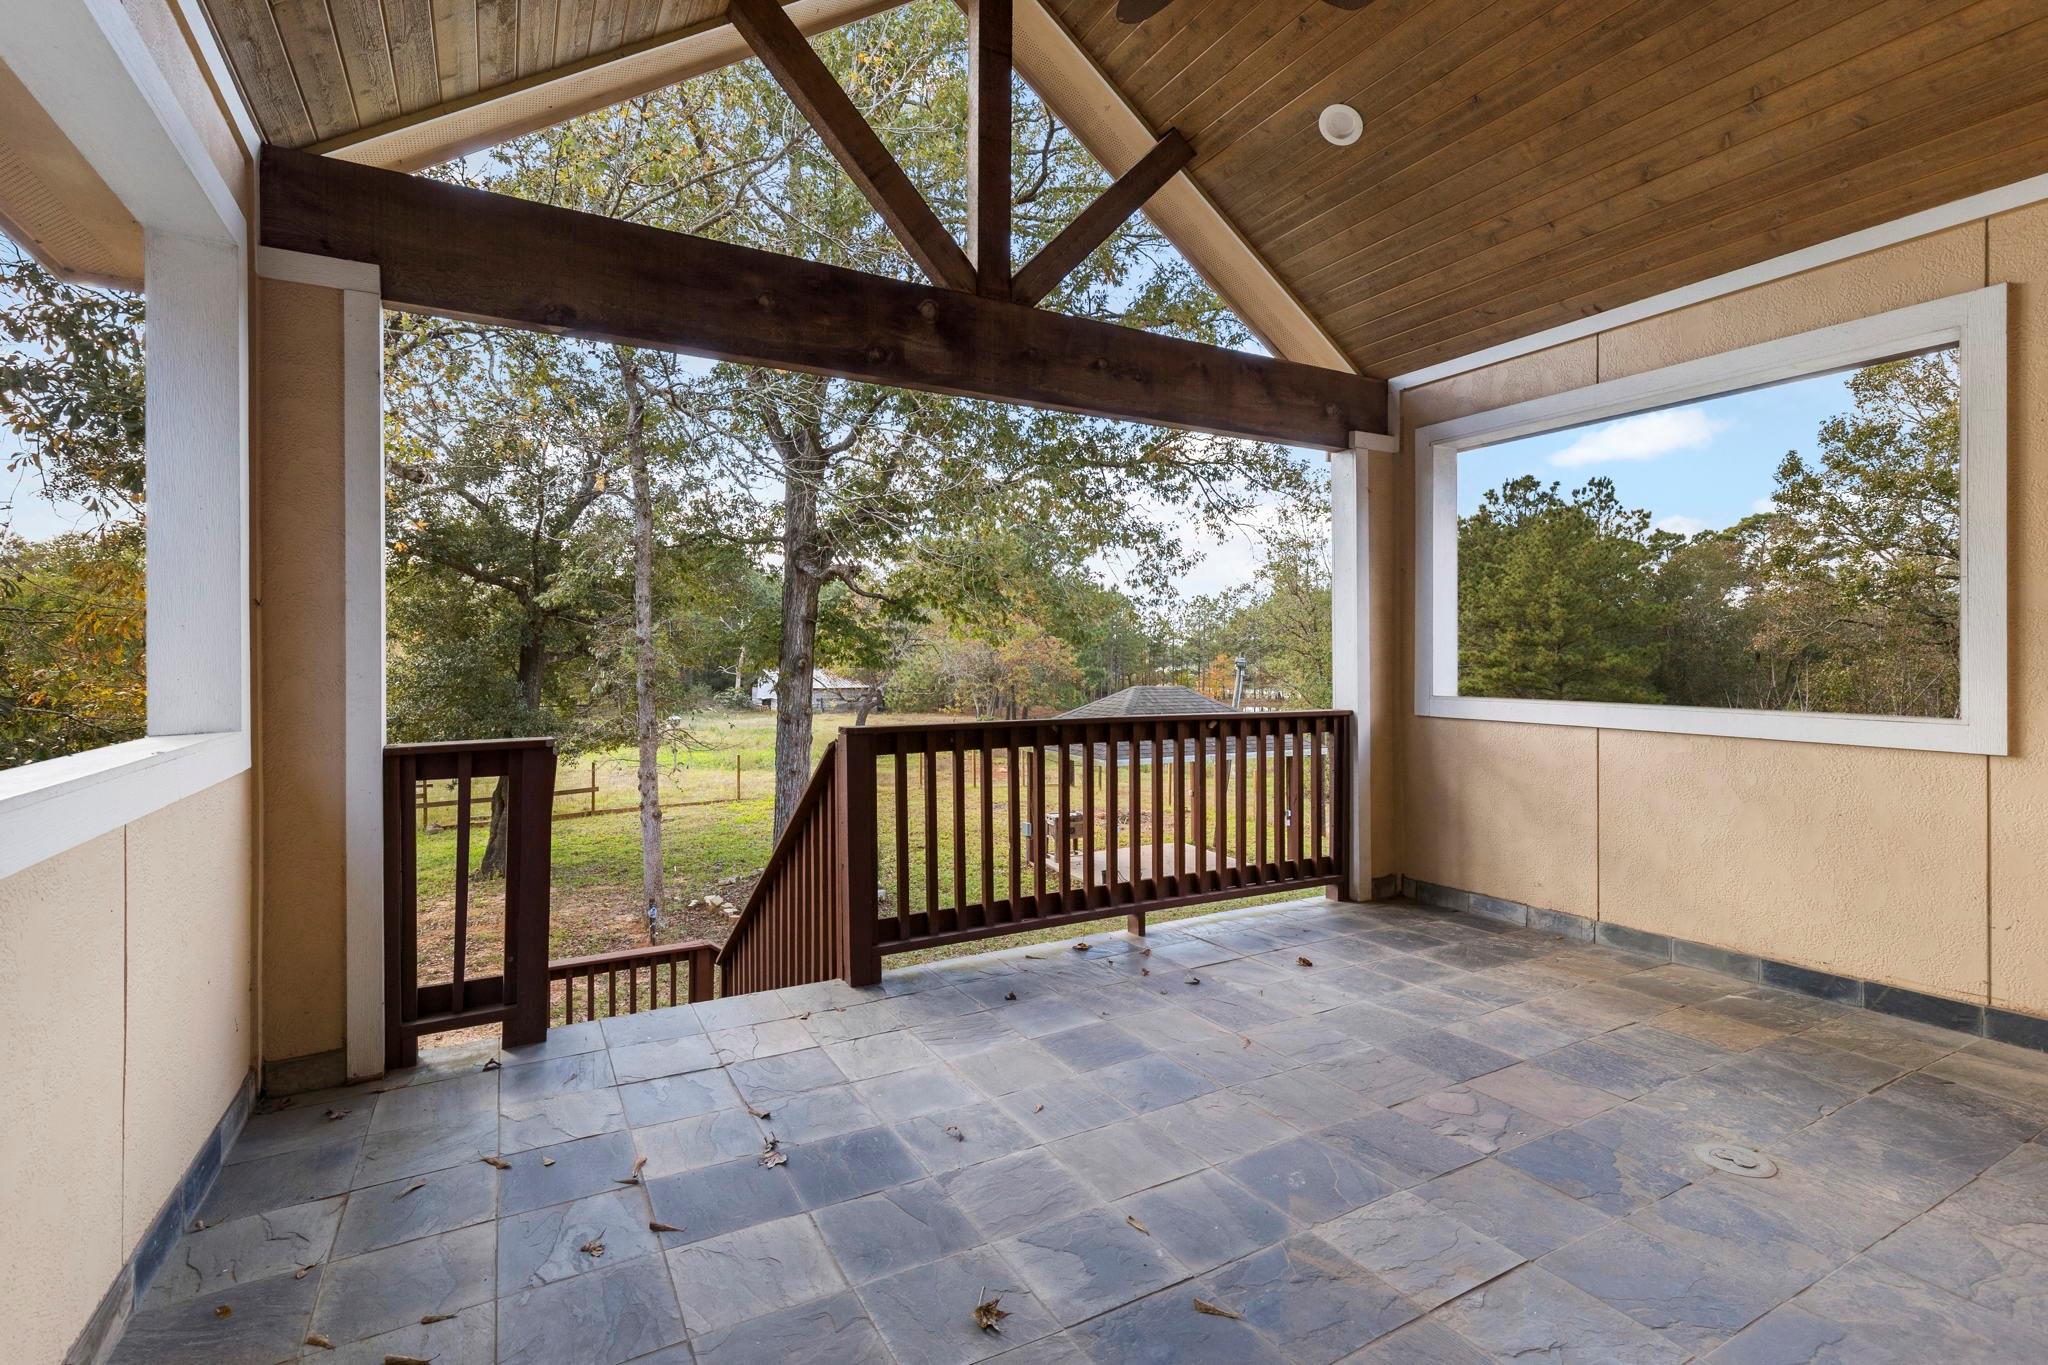 Upstairs patio features a gable ceiling and tongue and groove wood. - If you have additional questions regarding 1155 Whipporwill Road  in Conroe or would like to tour the property with us call 800-660-1022 and reference MLS# 12122183.